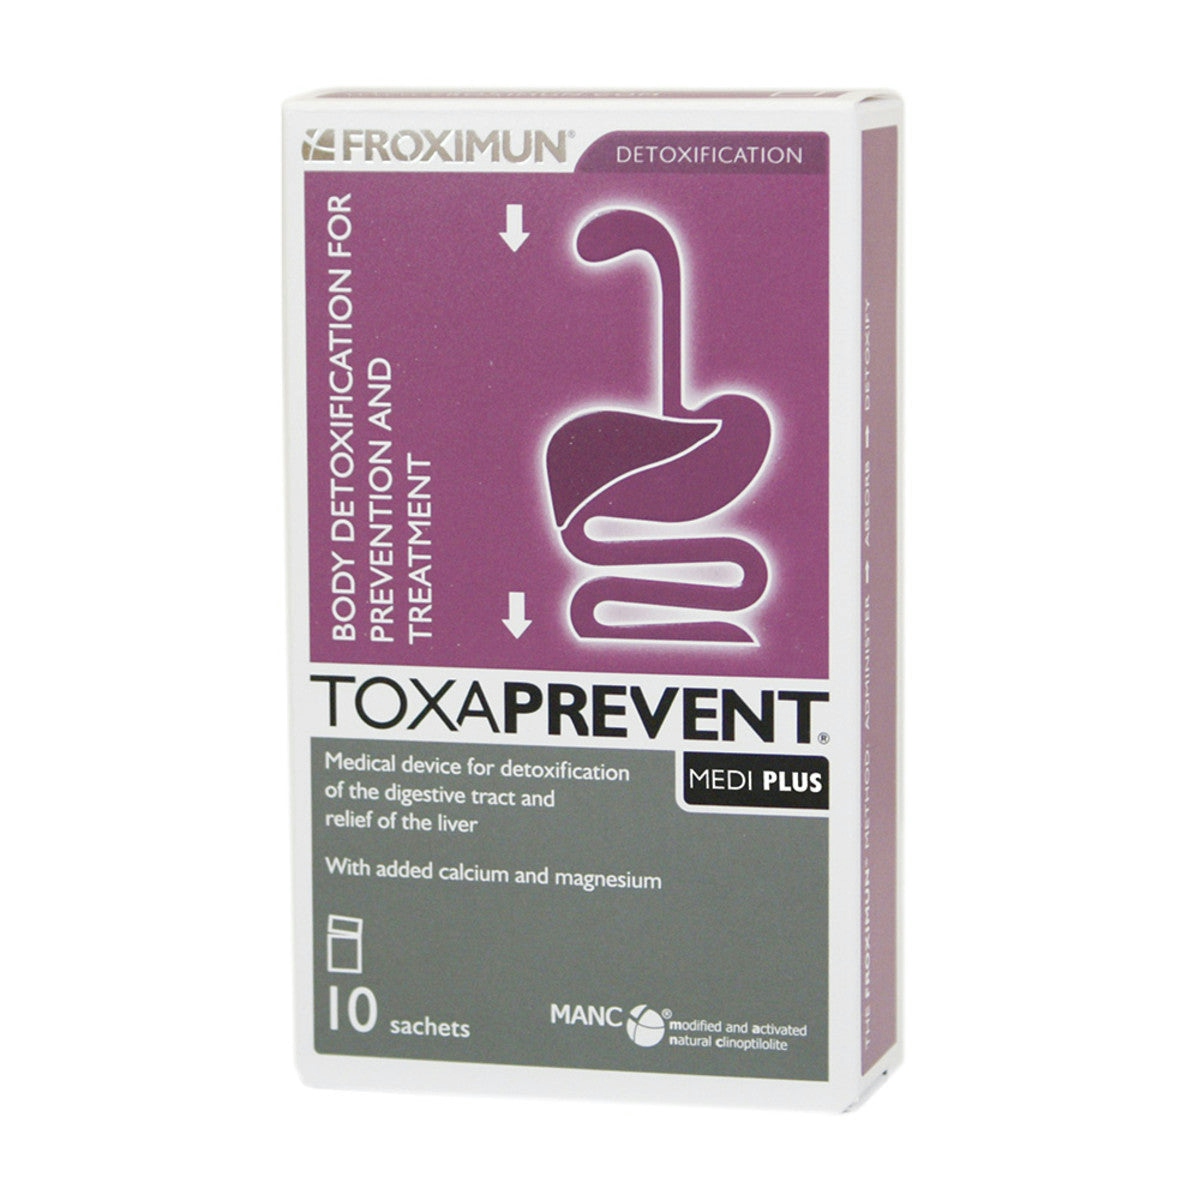 image of Bio-Practica Toxaprevent Medi Plus Sachets 3g x 10 Pack on white background 